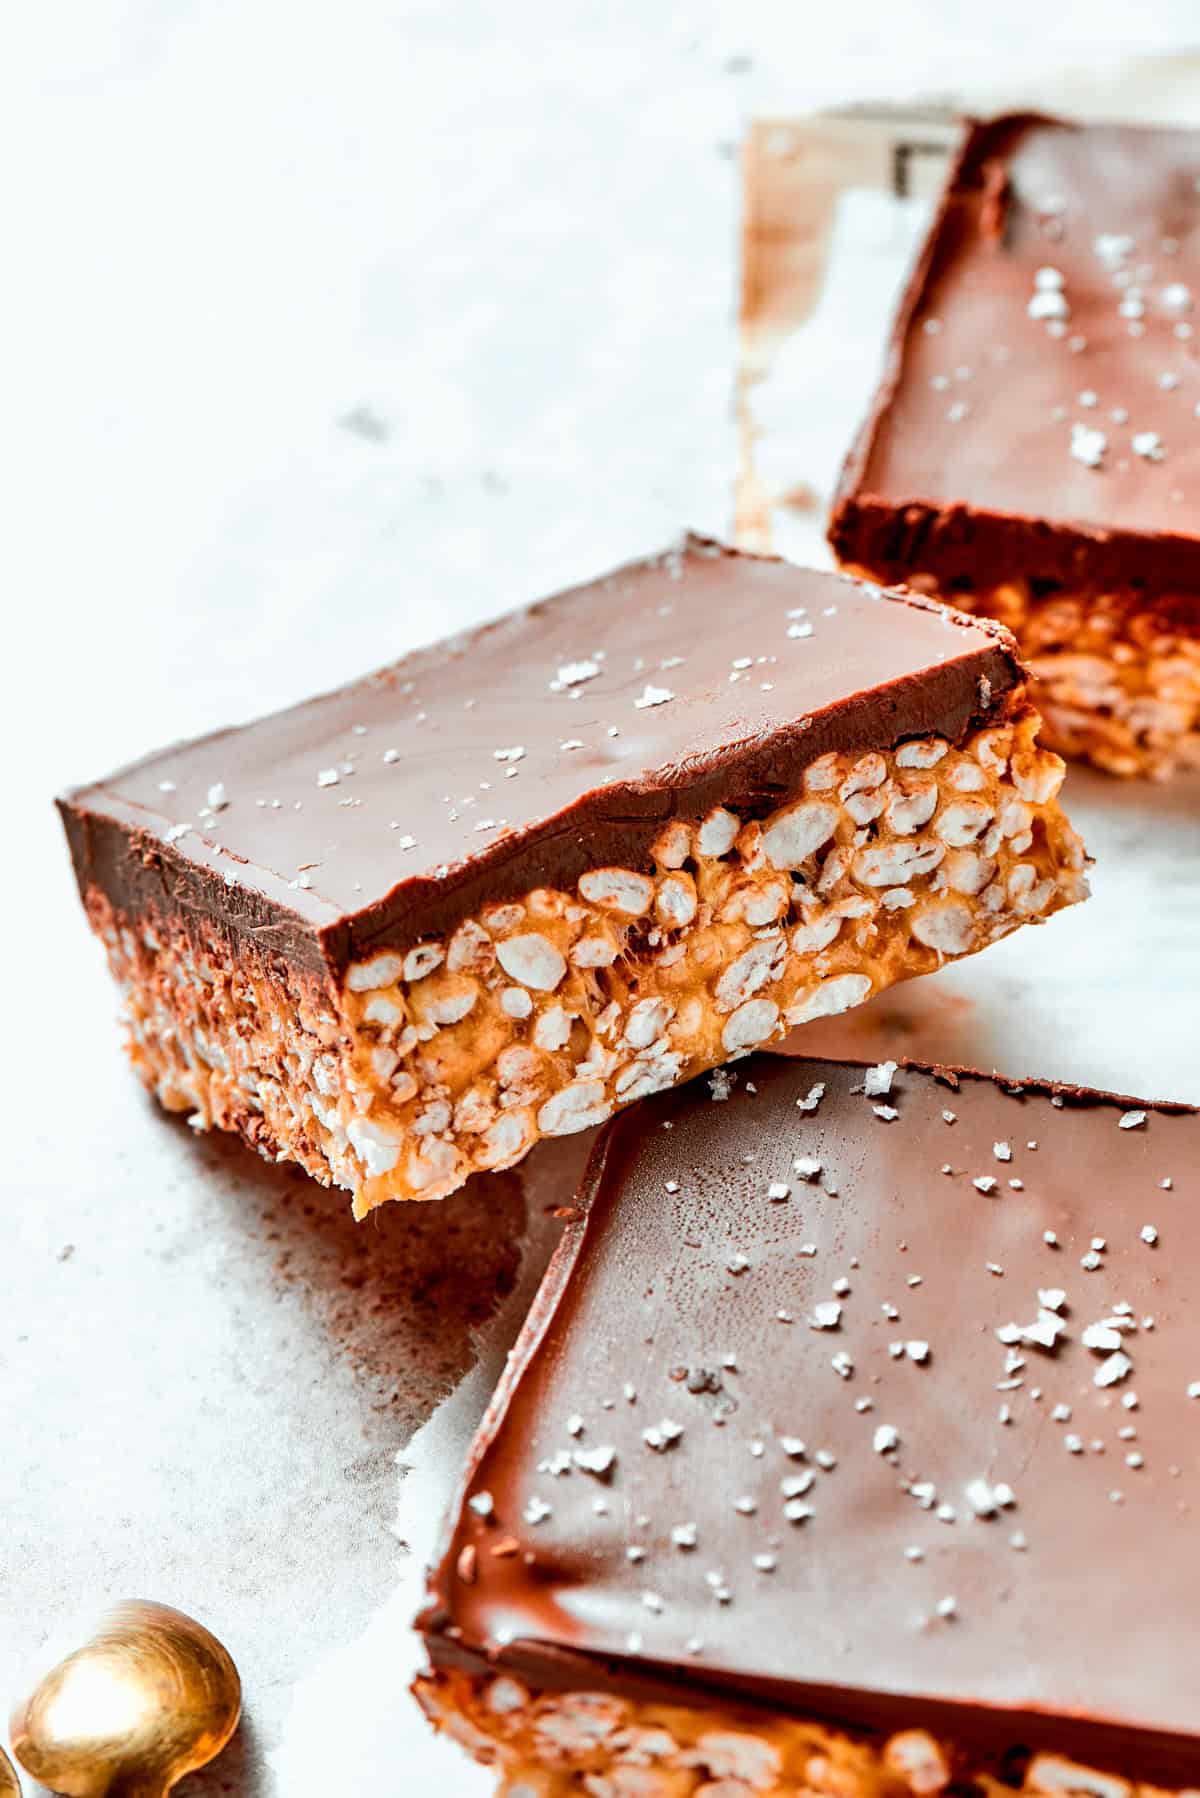 A square bar of rice krispies topped with a layer of melted chocolate.